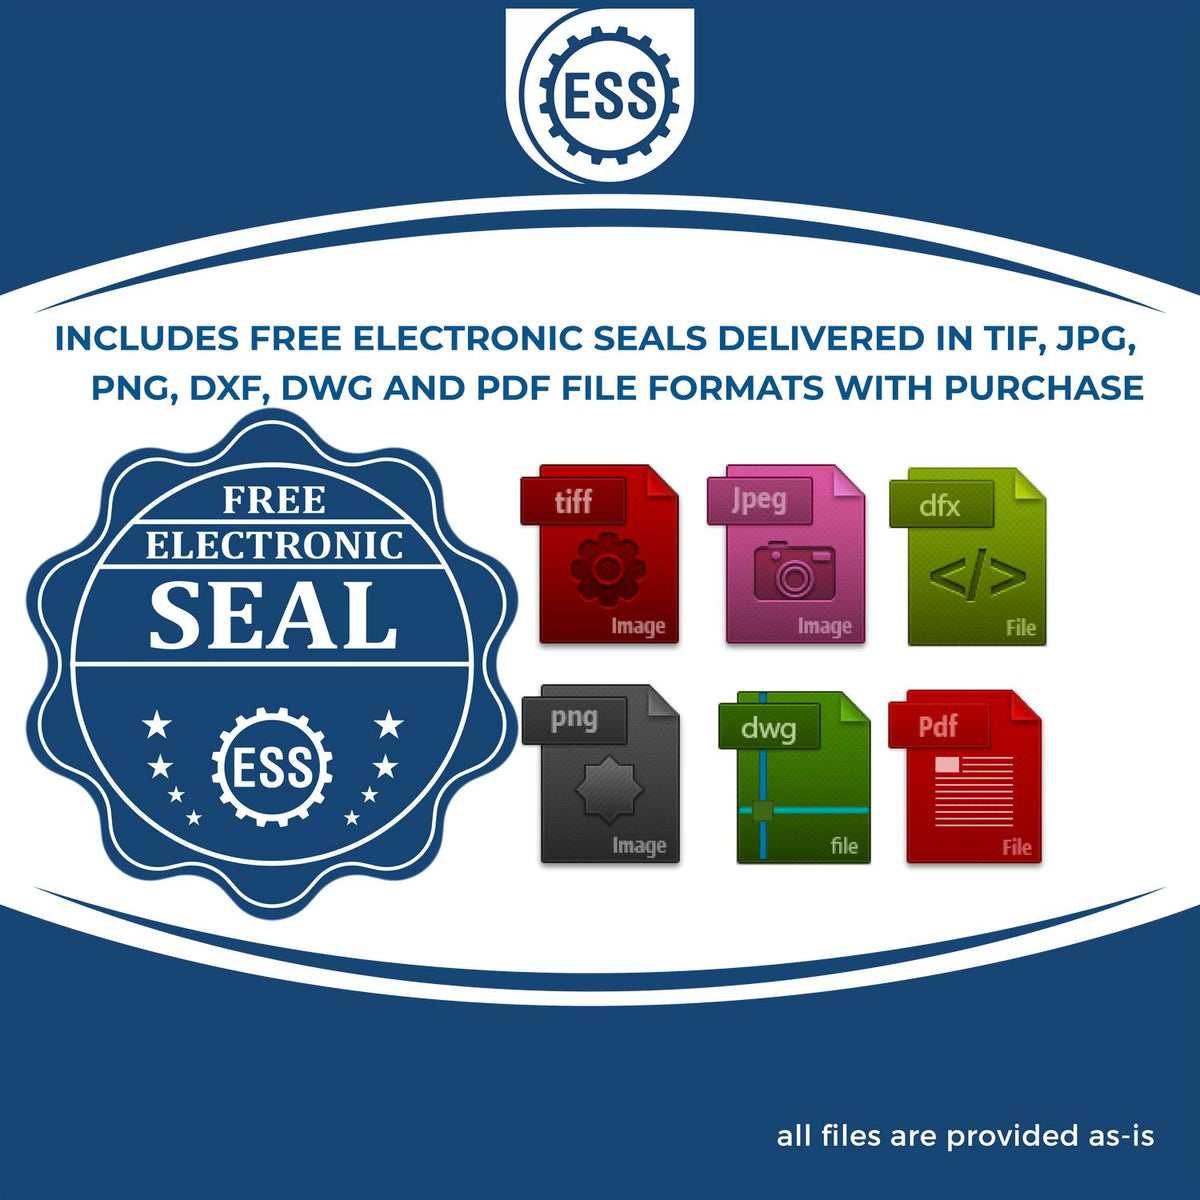 An infographic for the free electronic seal for the Extended Long Reach Michigan Surveyor Embosser illustrating the different file type icons such as DXF, DWG, TIF, JPG and PNG.